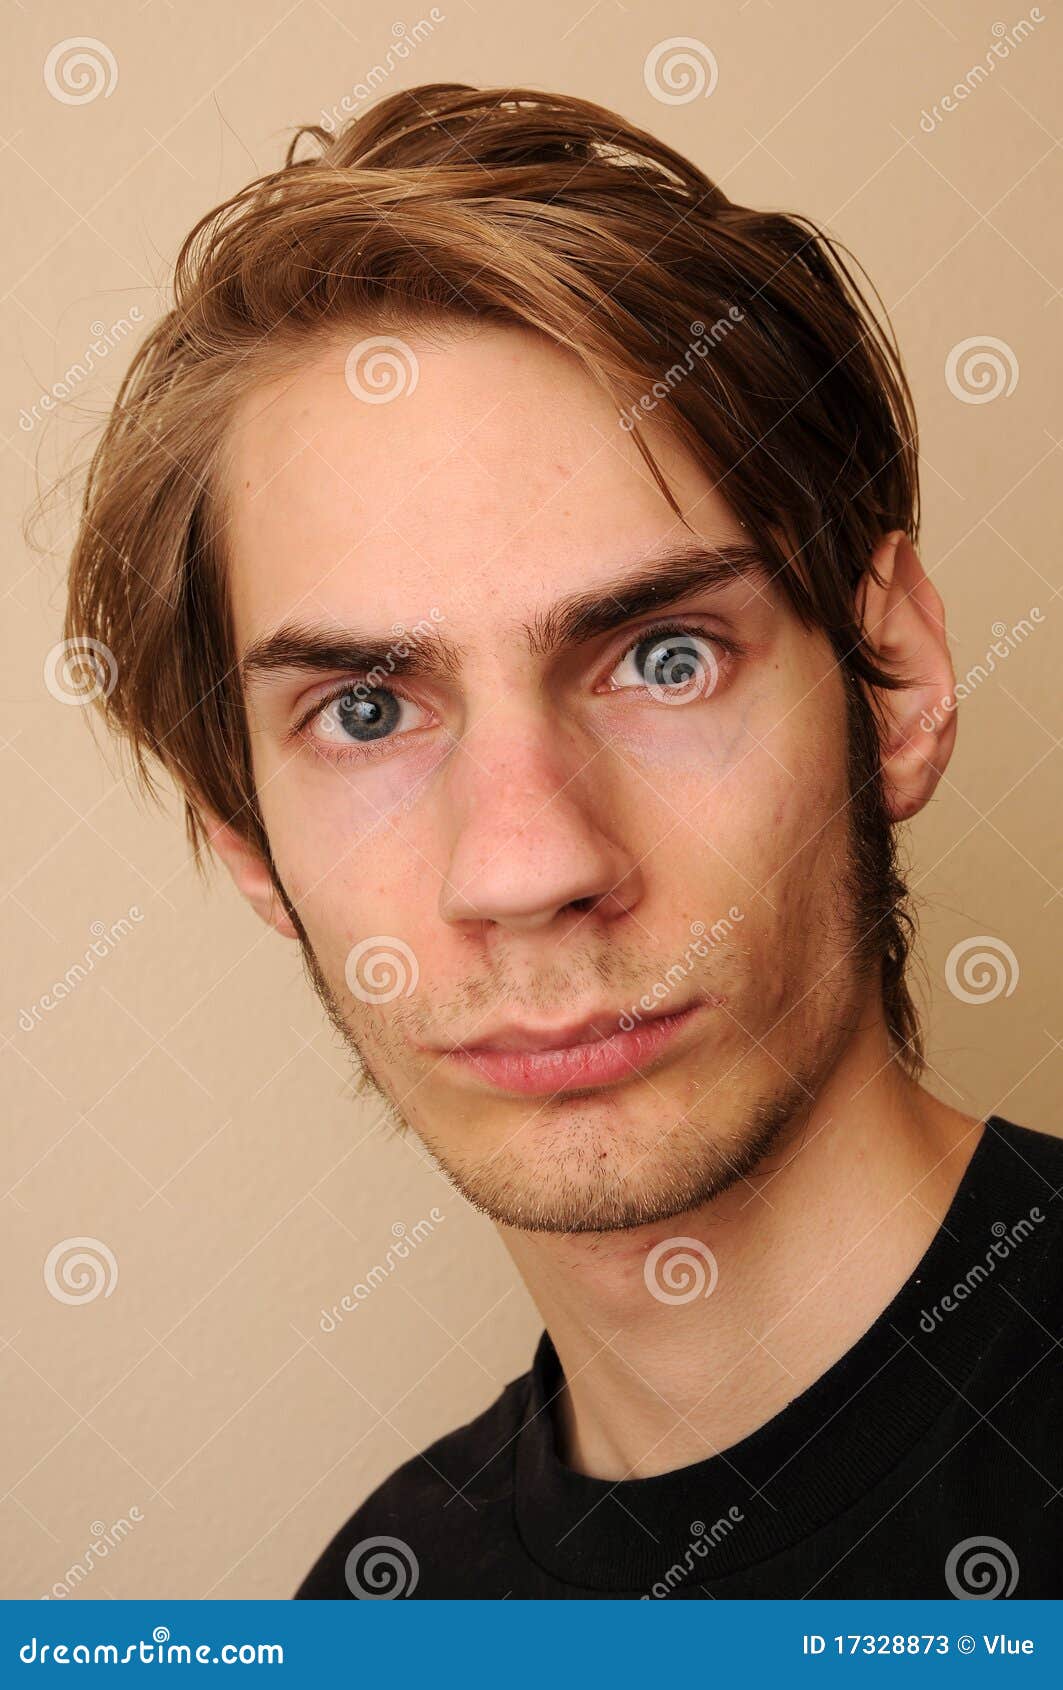 Man stock image. Image of emotionless, stare, wall, male - 17328873